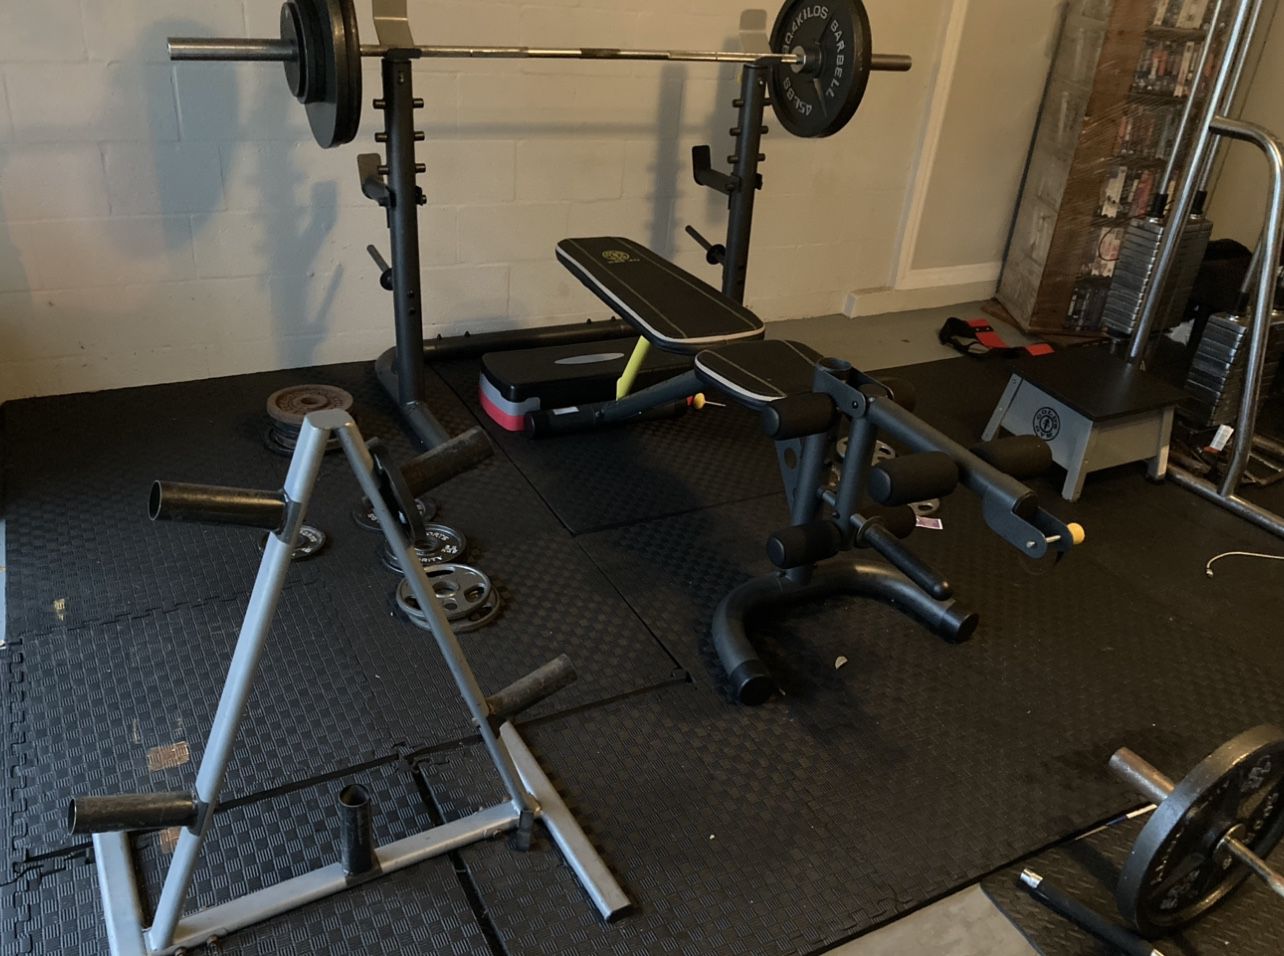 Weight Bench, Dumbbells, Olympic Bar, Weight Holder, Weights